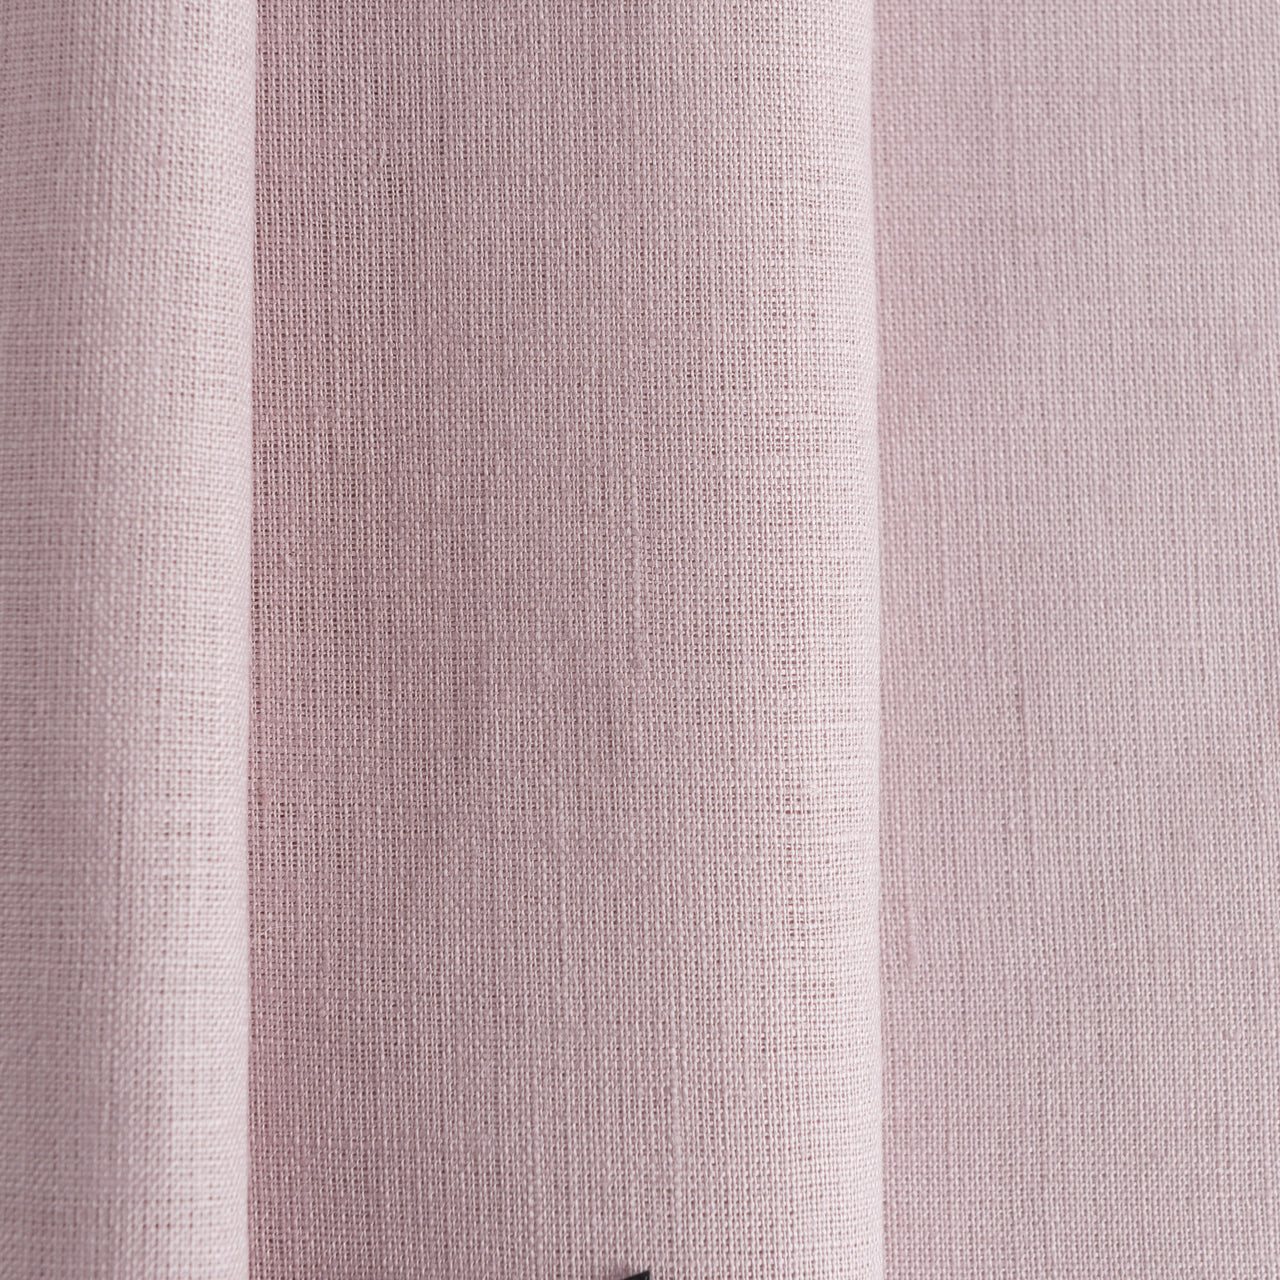 Dusty Pink Linen Fabric by the Yard - 100% French Natural - Width 52”- 106”